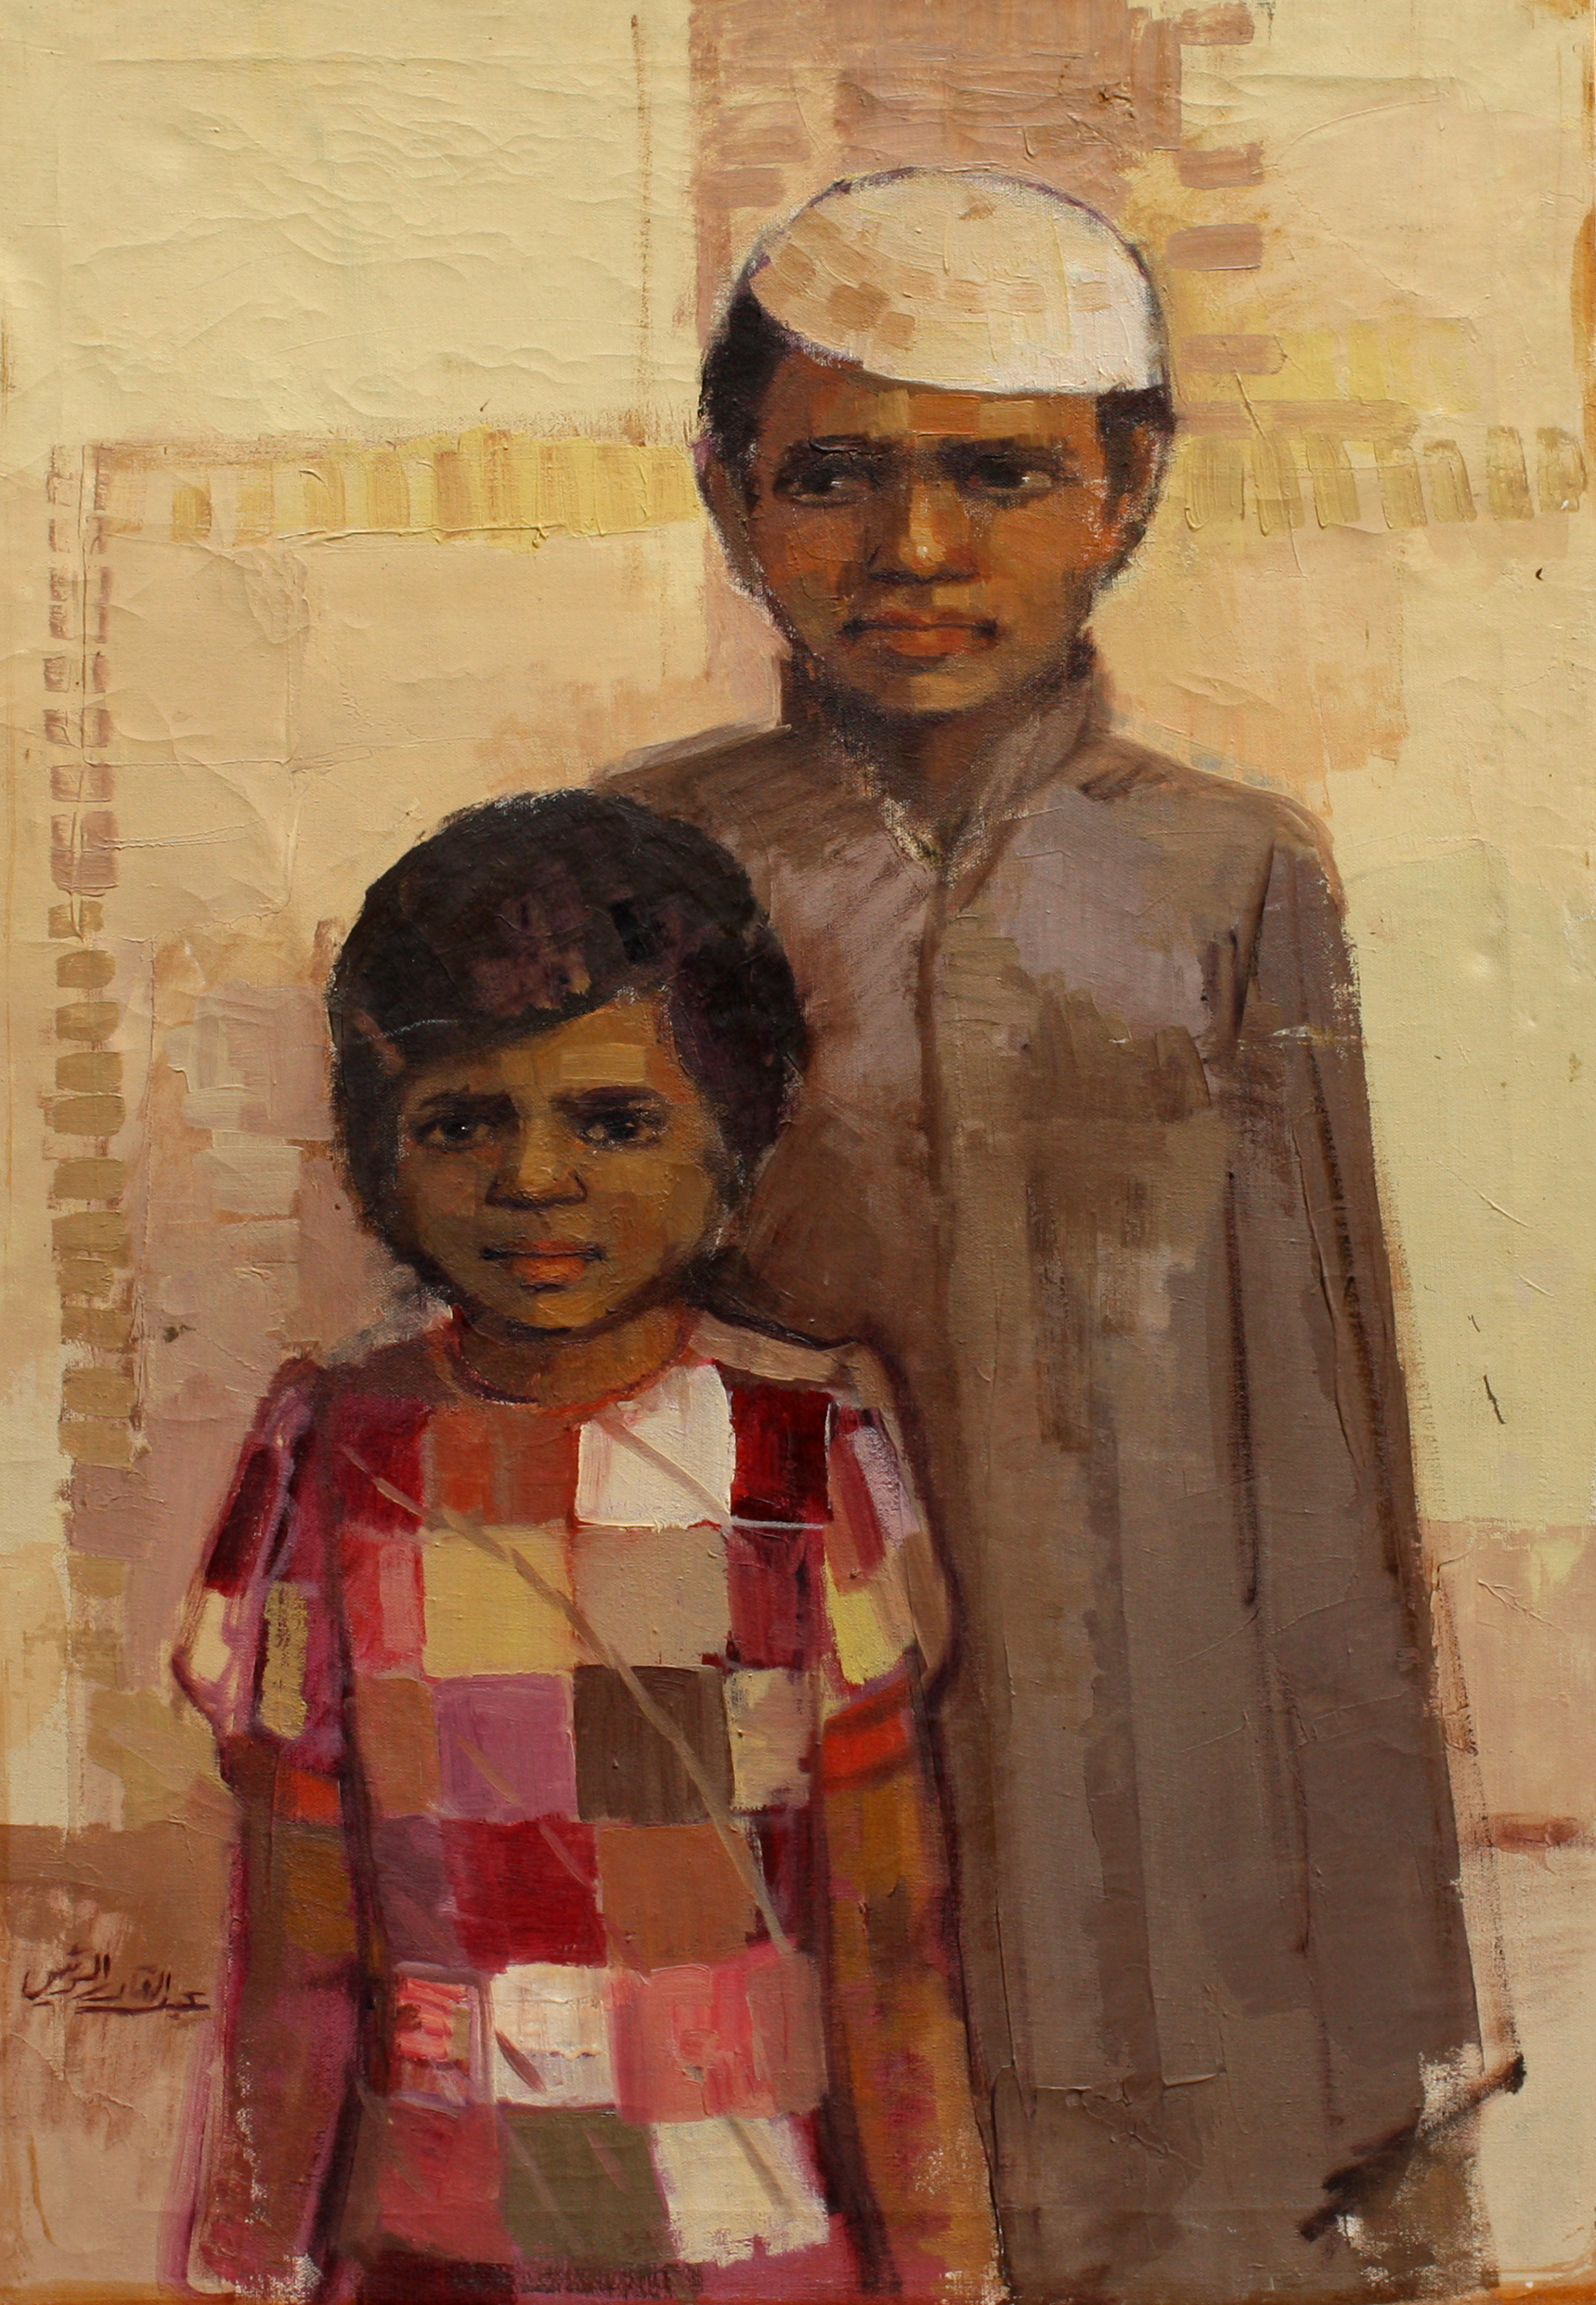 Obaid and Mouza. 1968. oil on canvas.